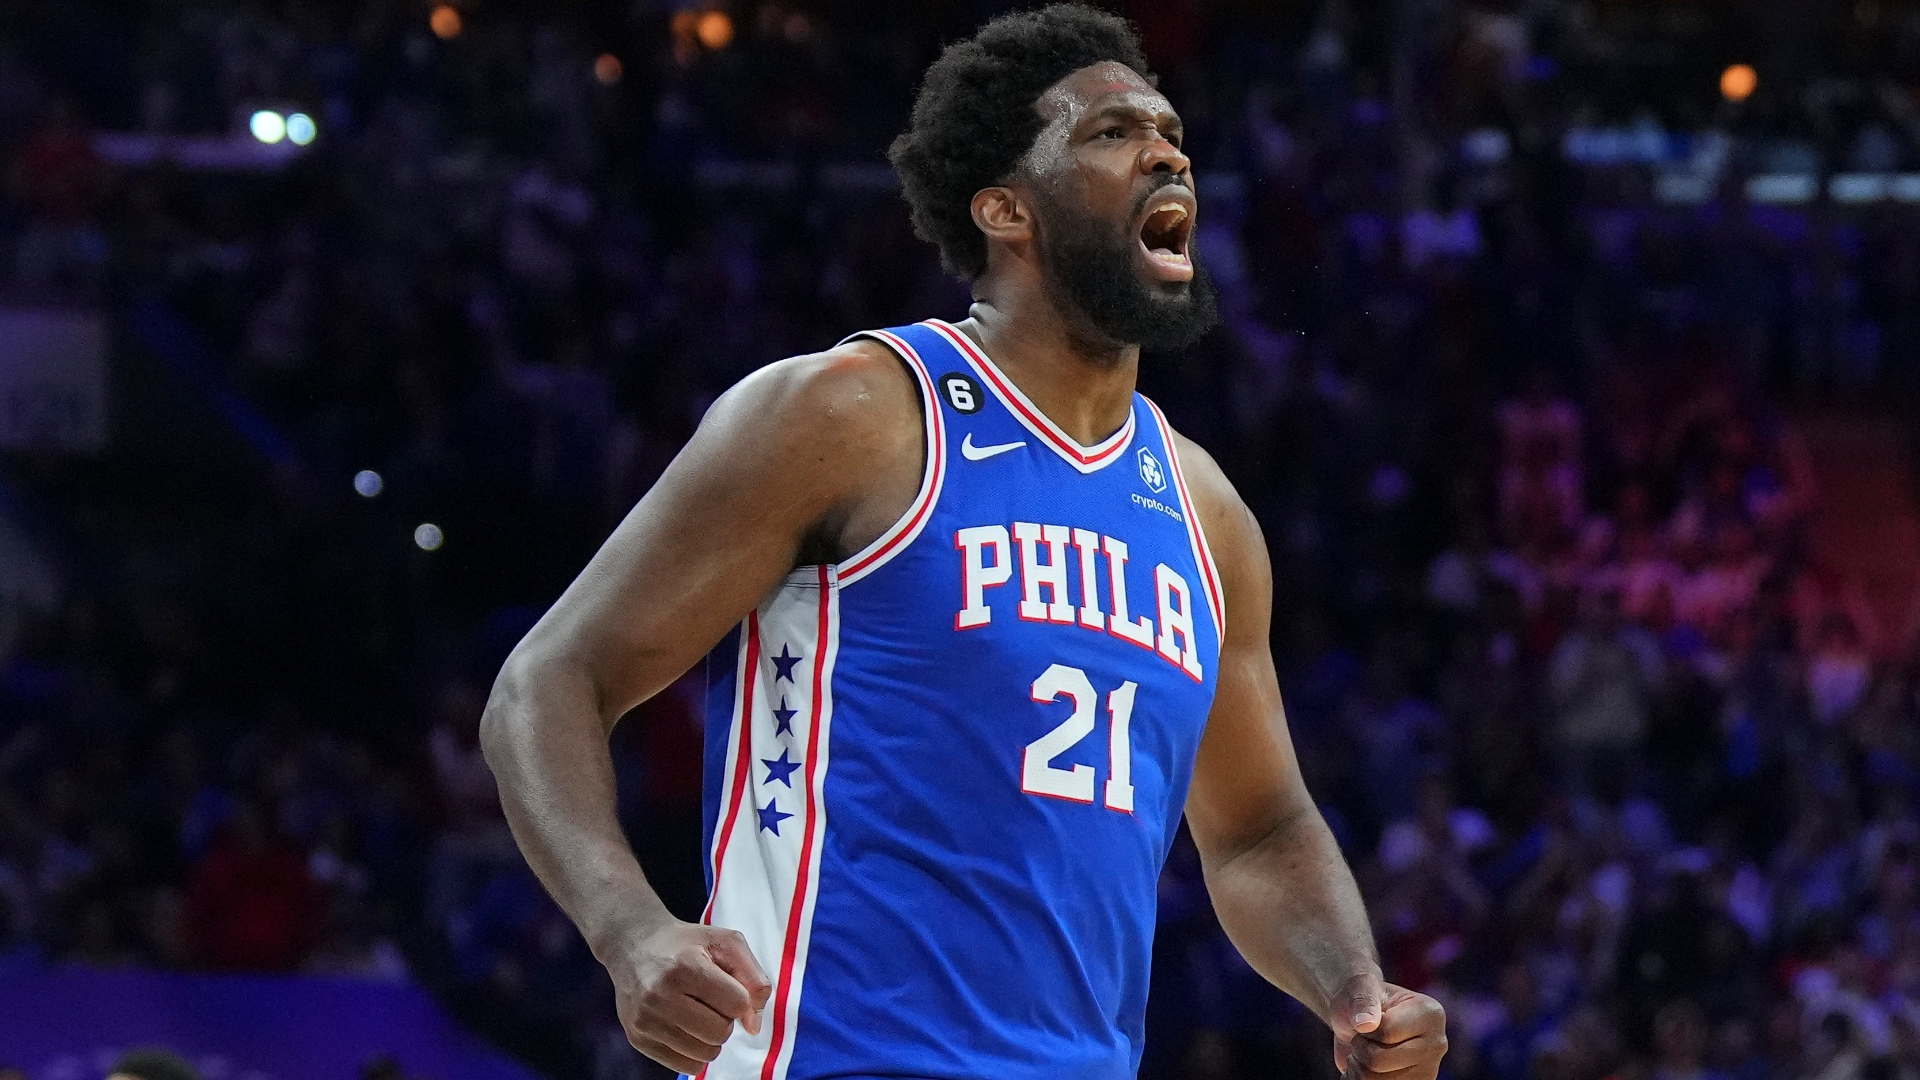 Joel Embiids journey to becoming the NBAs Most Valuable Player - Stream the Video